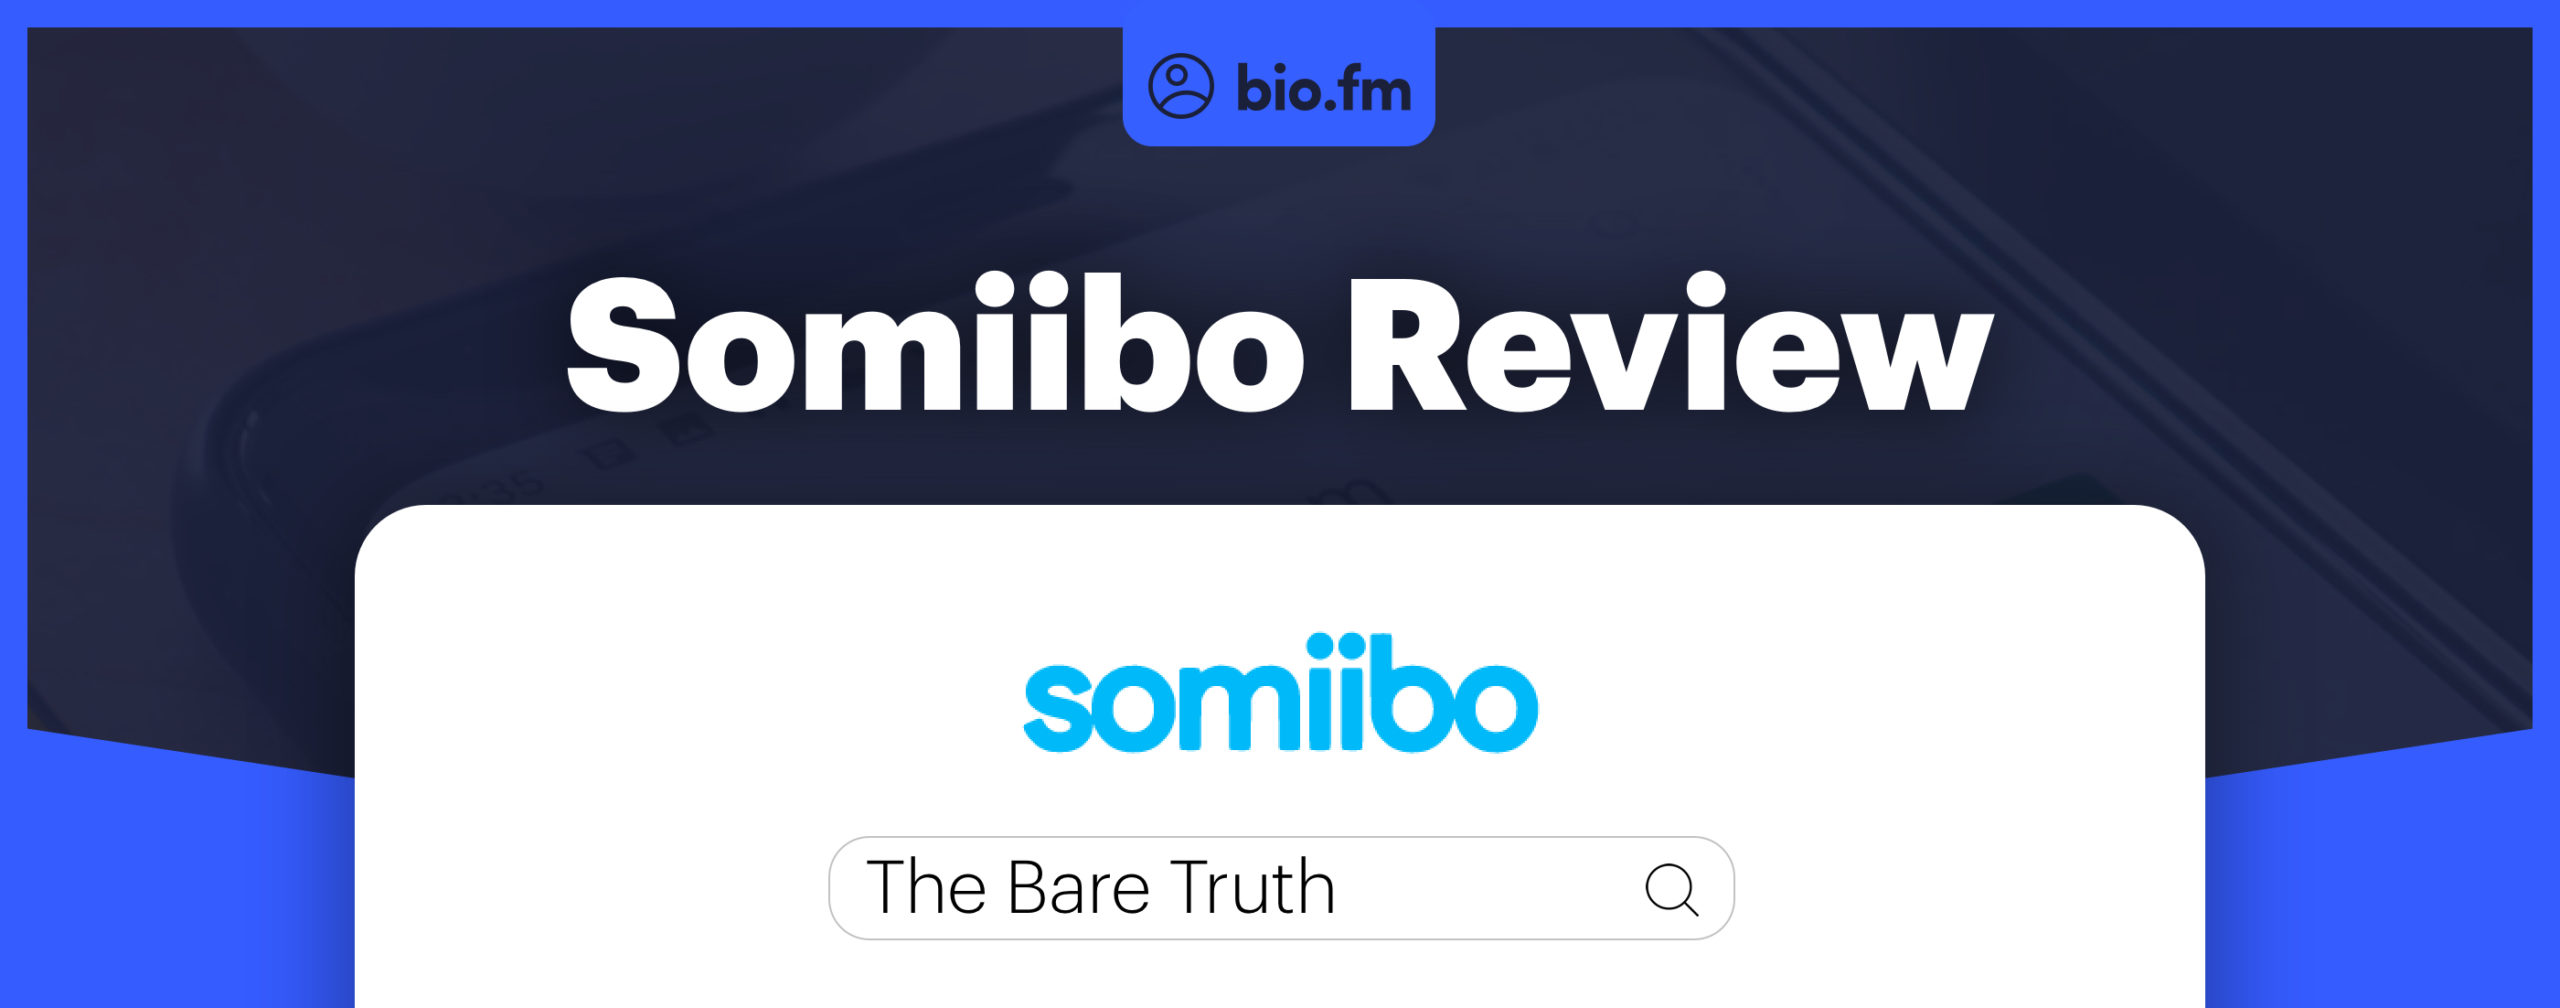 somiibo review featured image